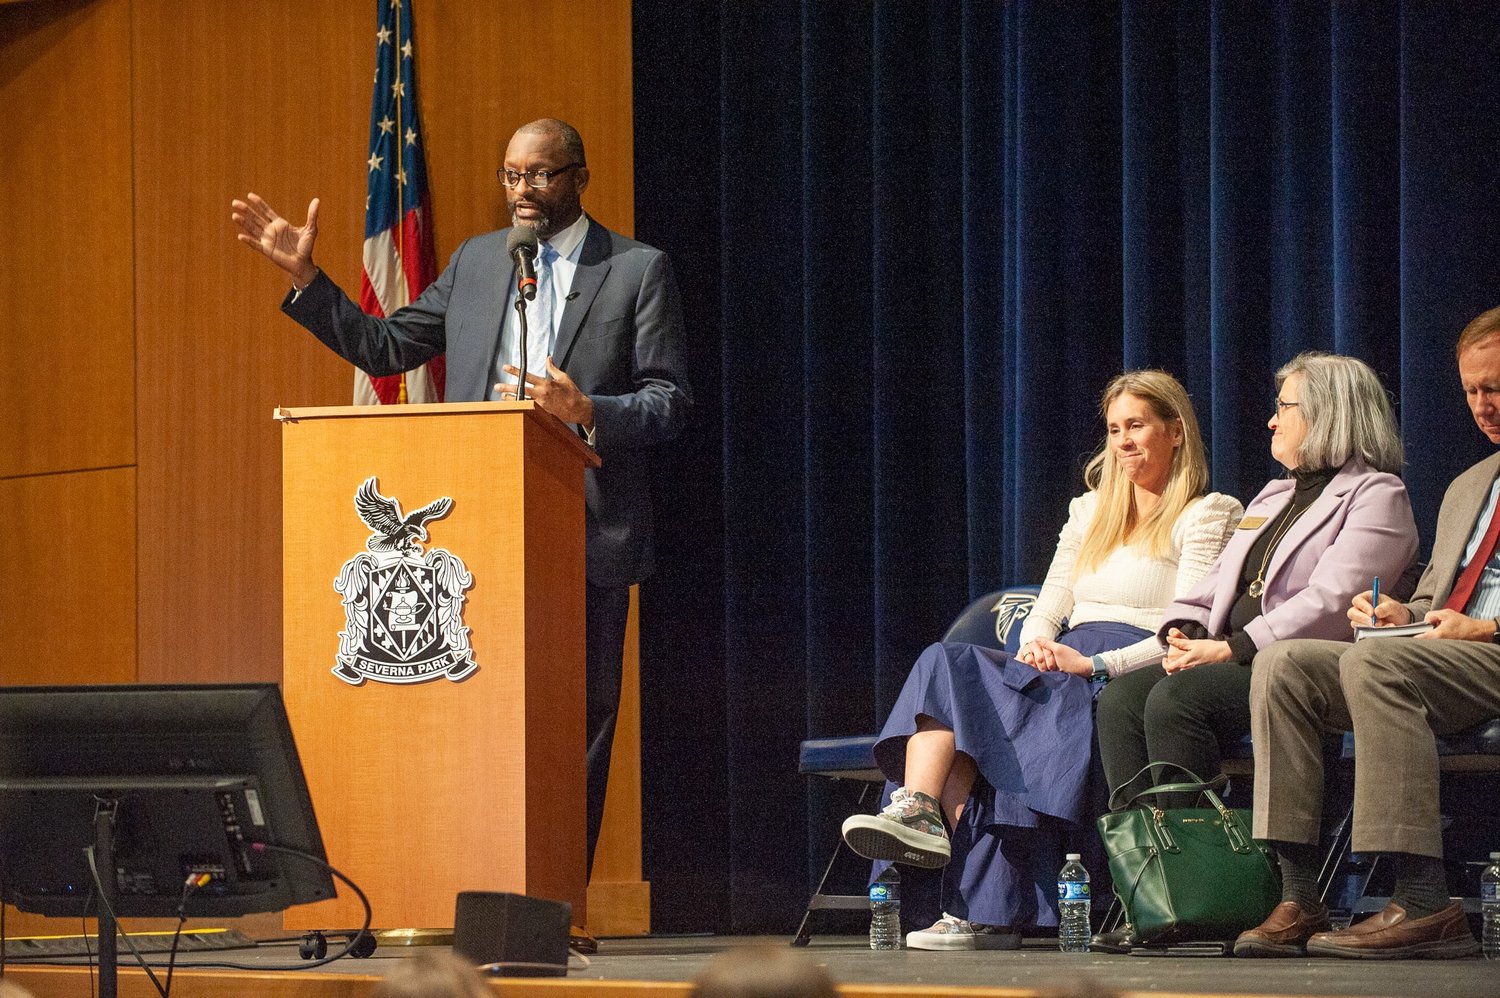 Superintendent Mark Bedell said he wants students to see themselves reflected in the curriculum from “a resiliency lens, not a deficit lens.”